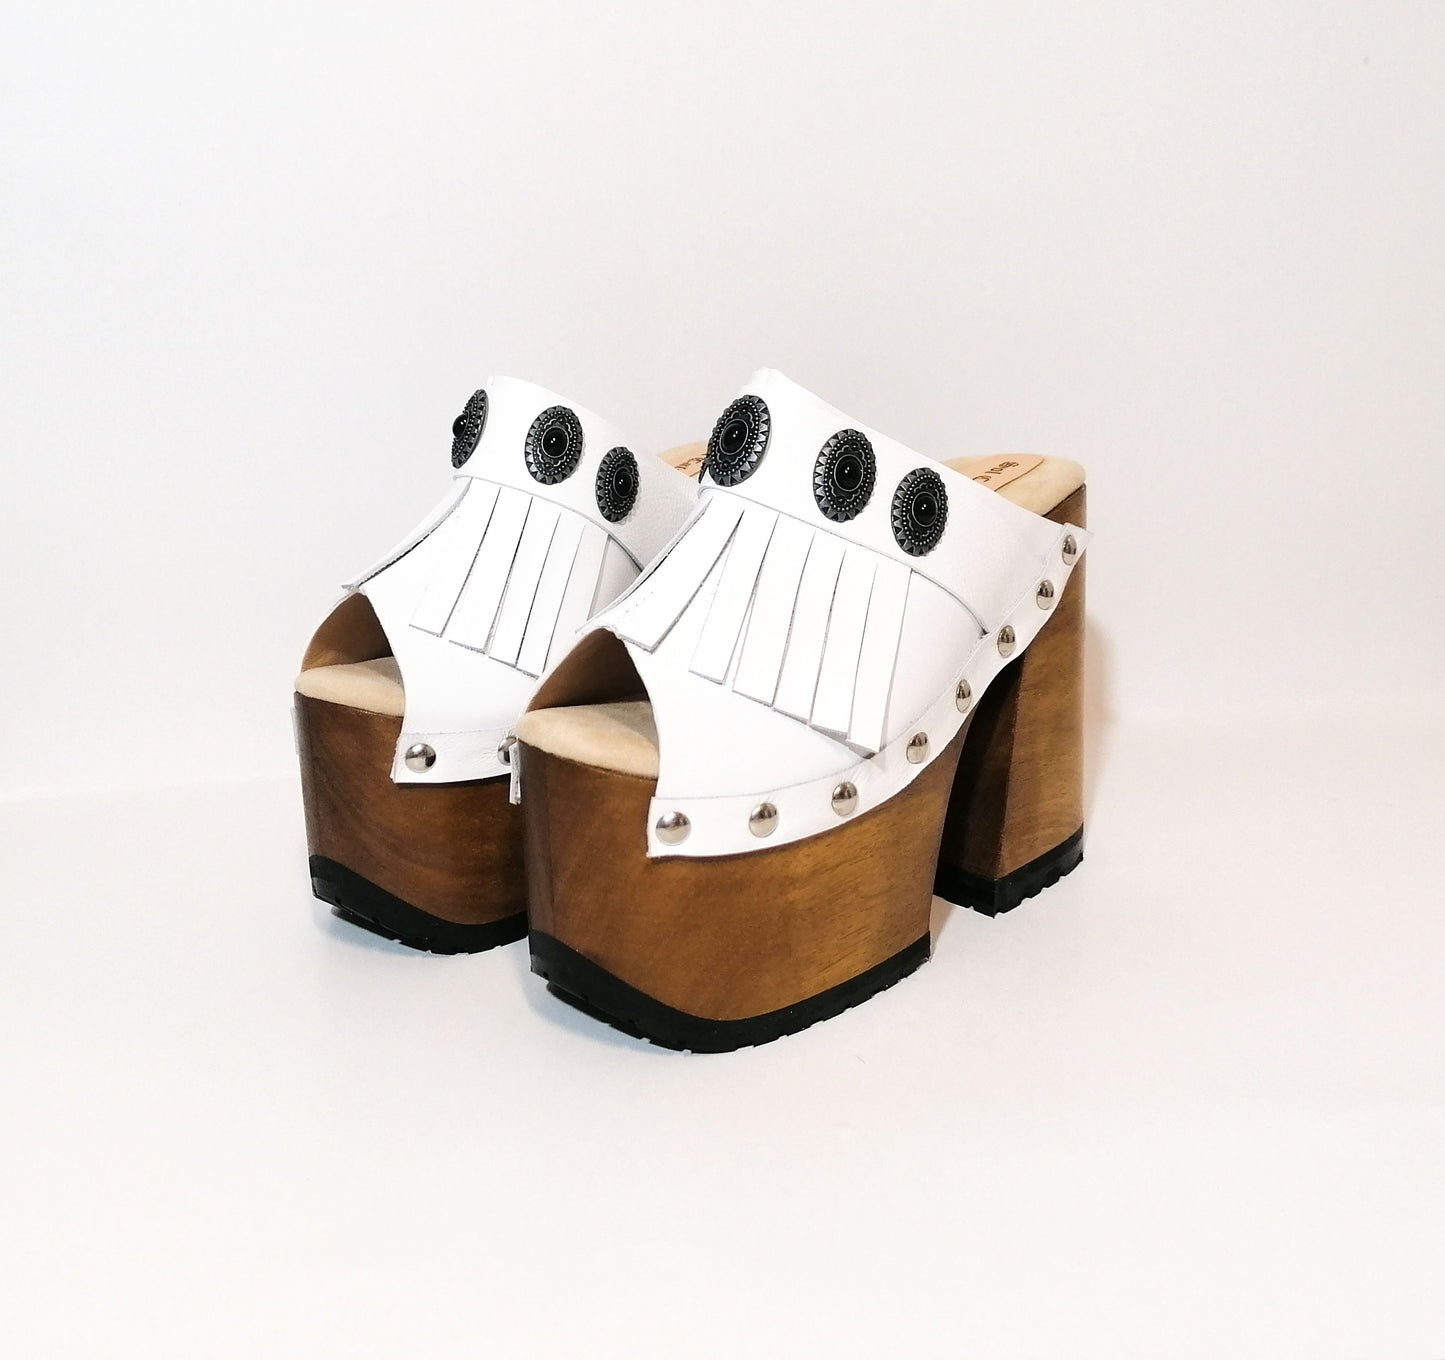 White leather sandal. White leather sandal boho style. White leather sandal decorated with fringes and silver conchos with a unique boho style. Wooden clog sandals with super high heels 70's style. Sizes 34 to 47. High quality handmade leather shoes by sol Caleyo. Sustainable fashion.